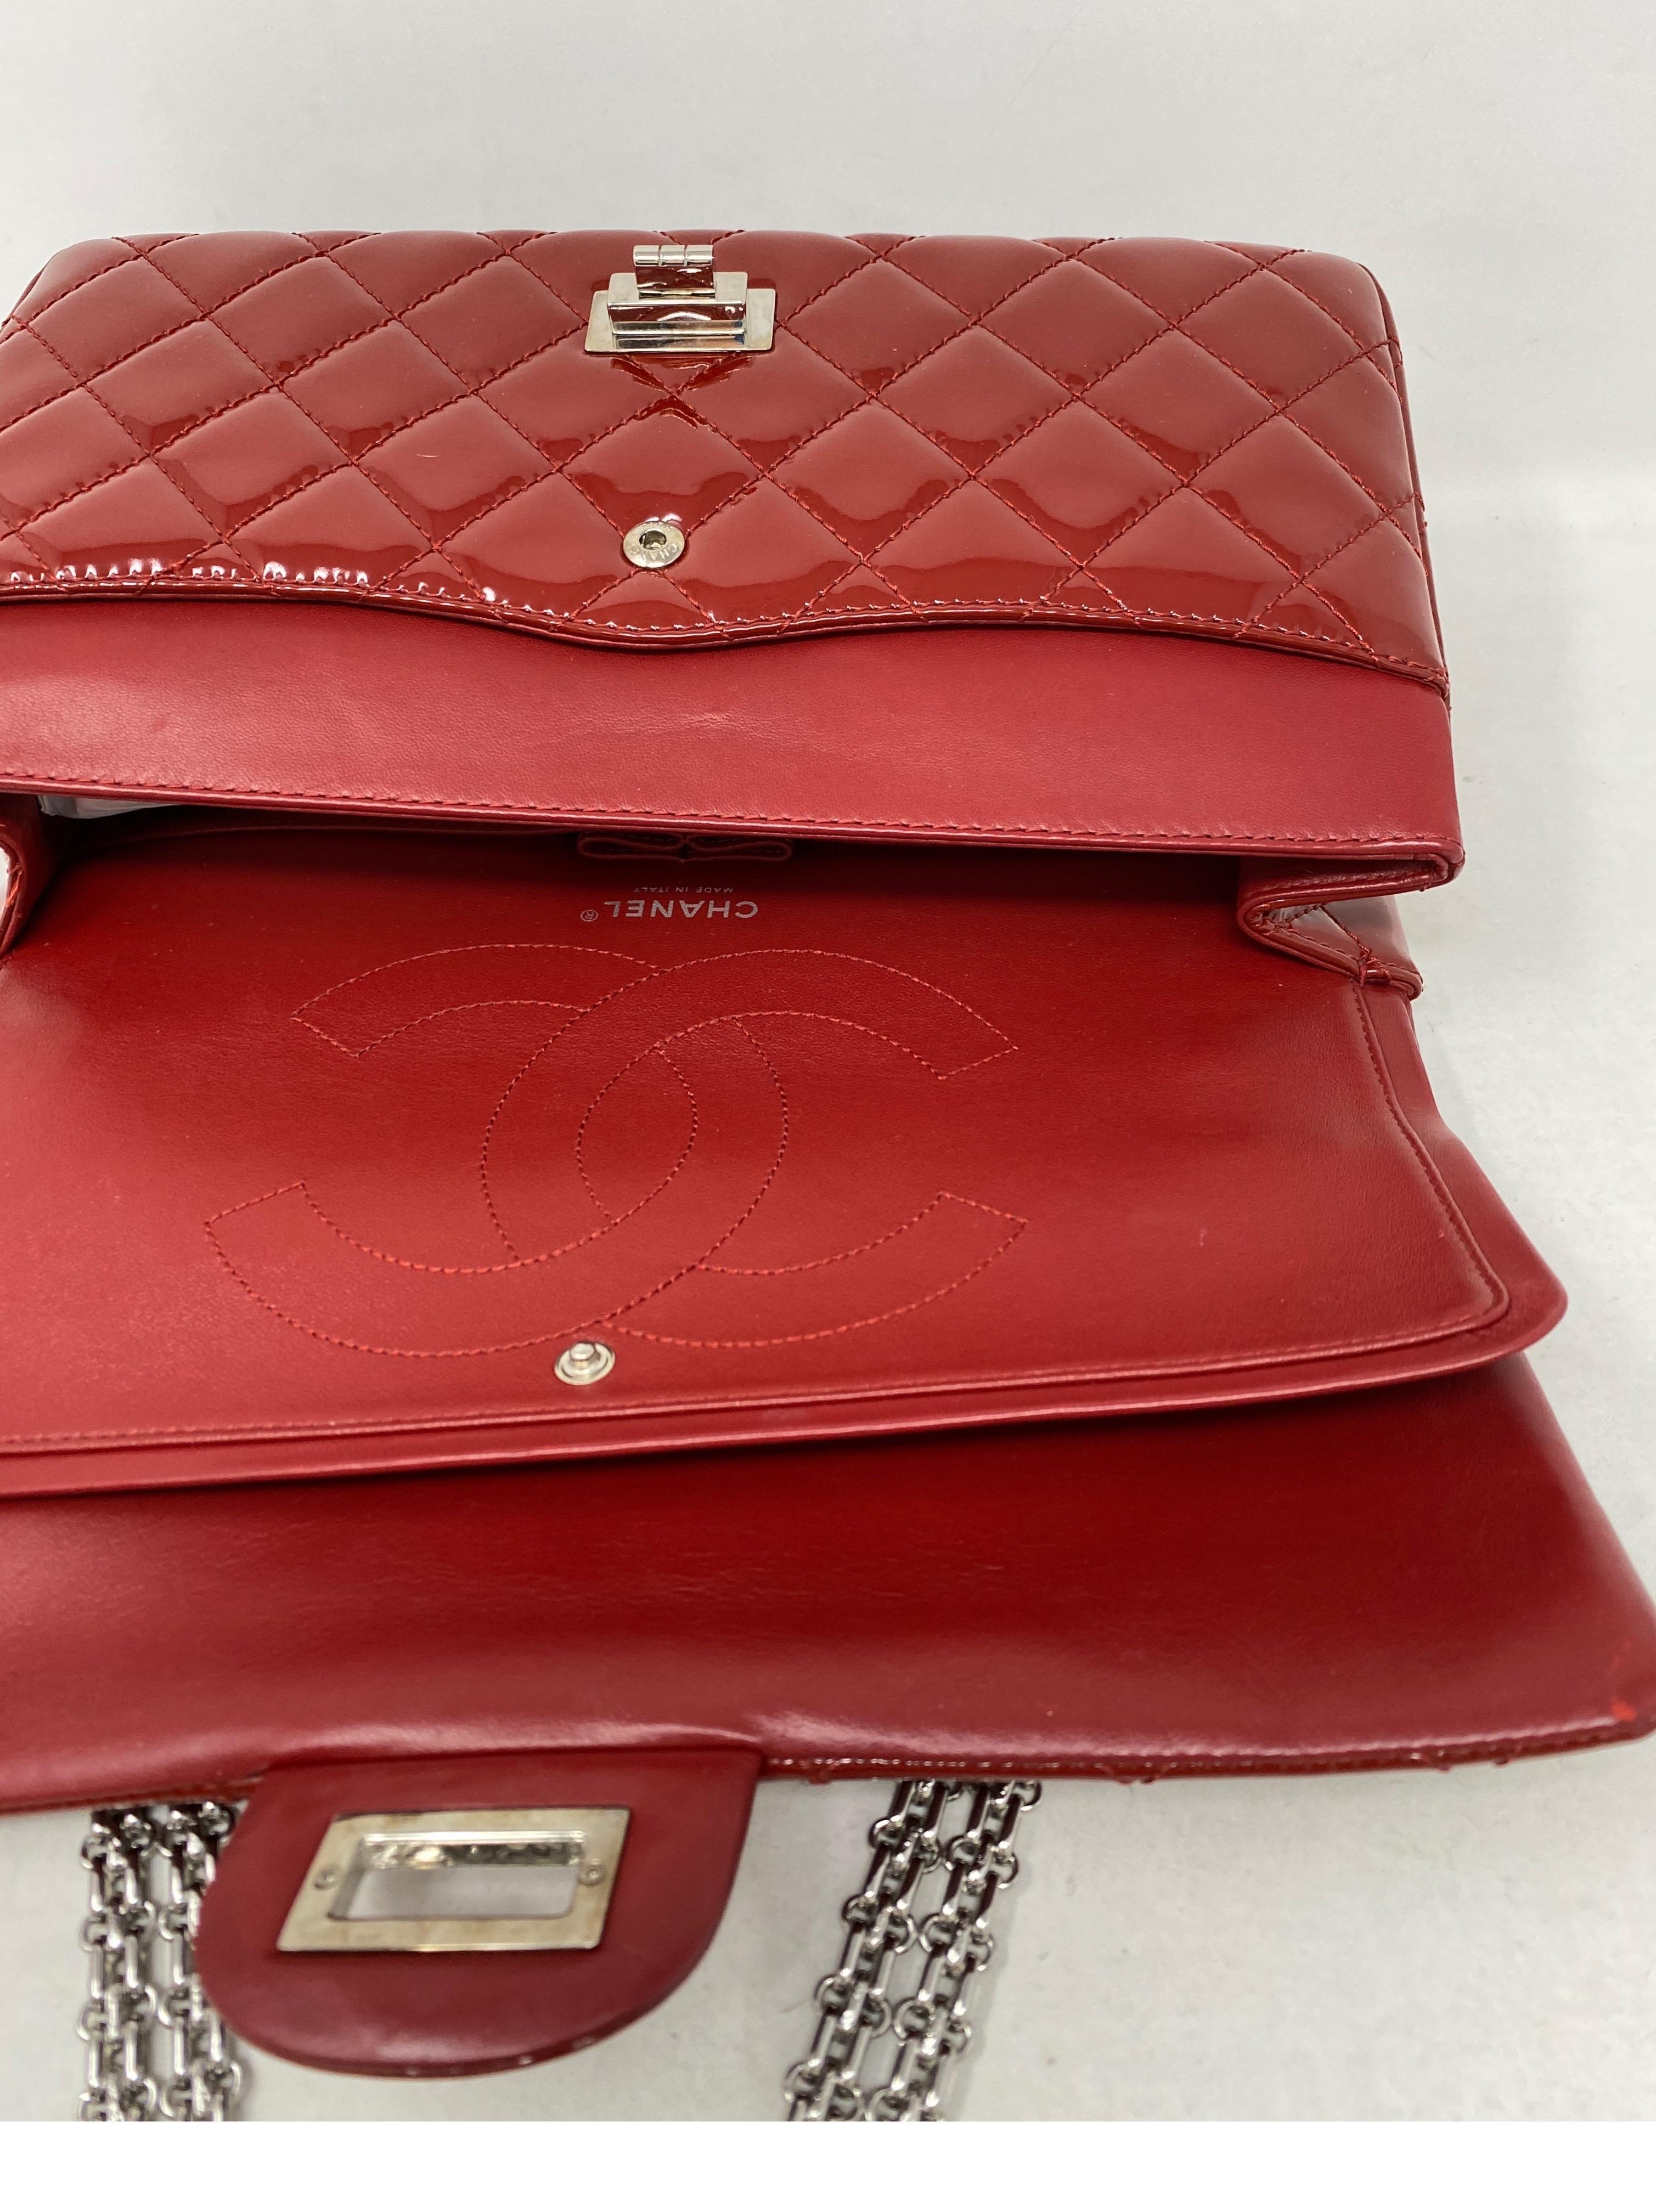 Chanel Red Jumbo Patent Reissue Leather Bag  7